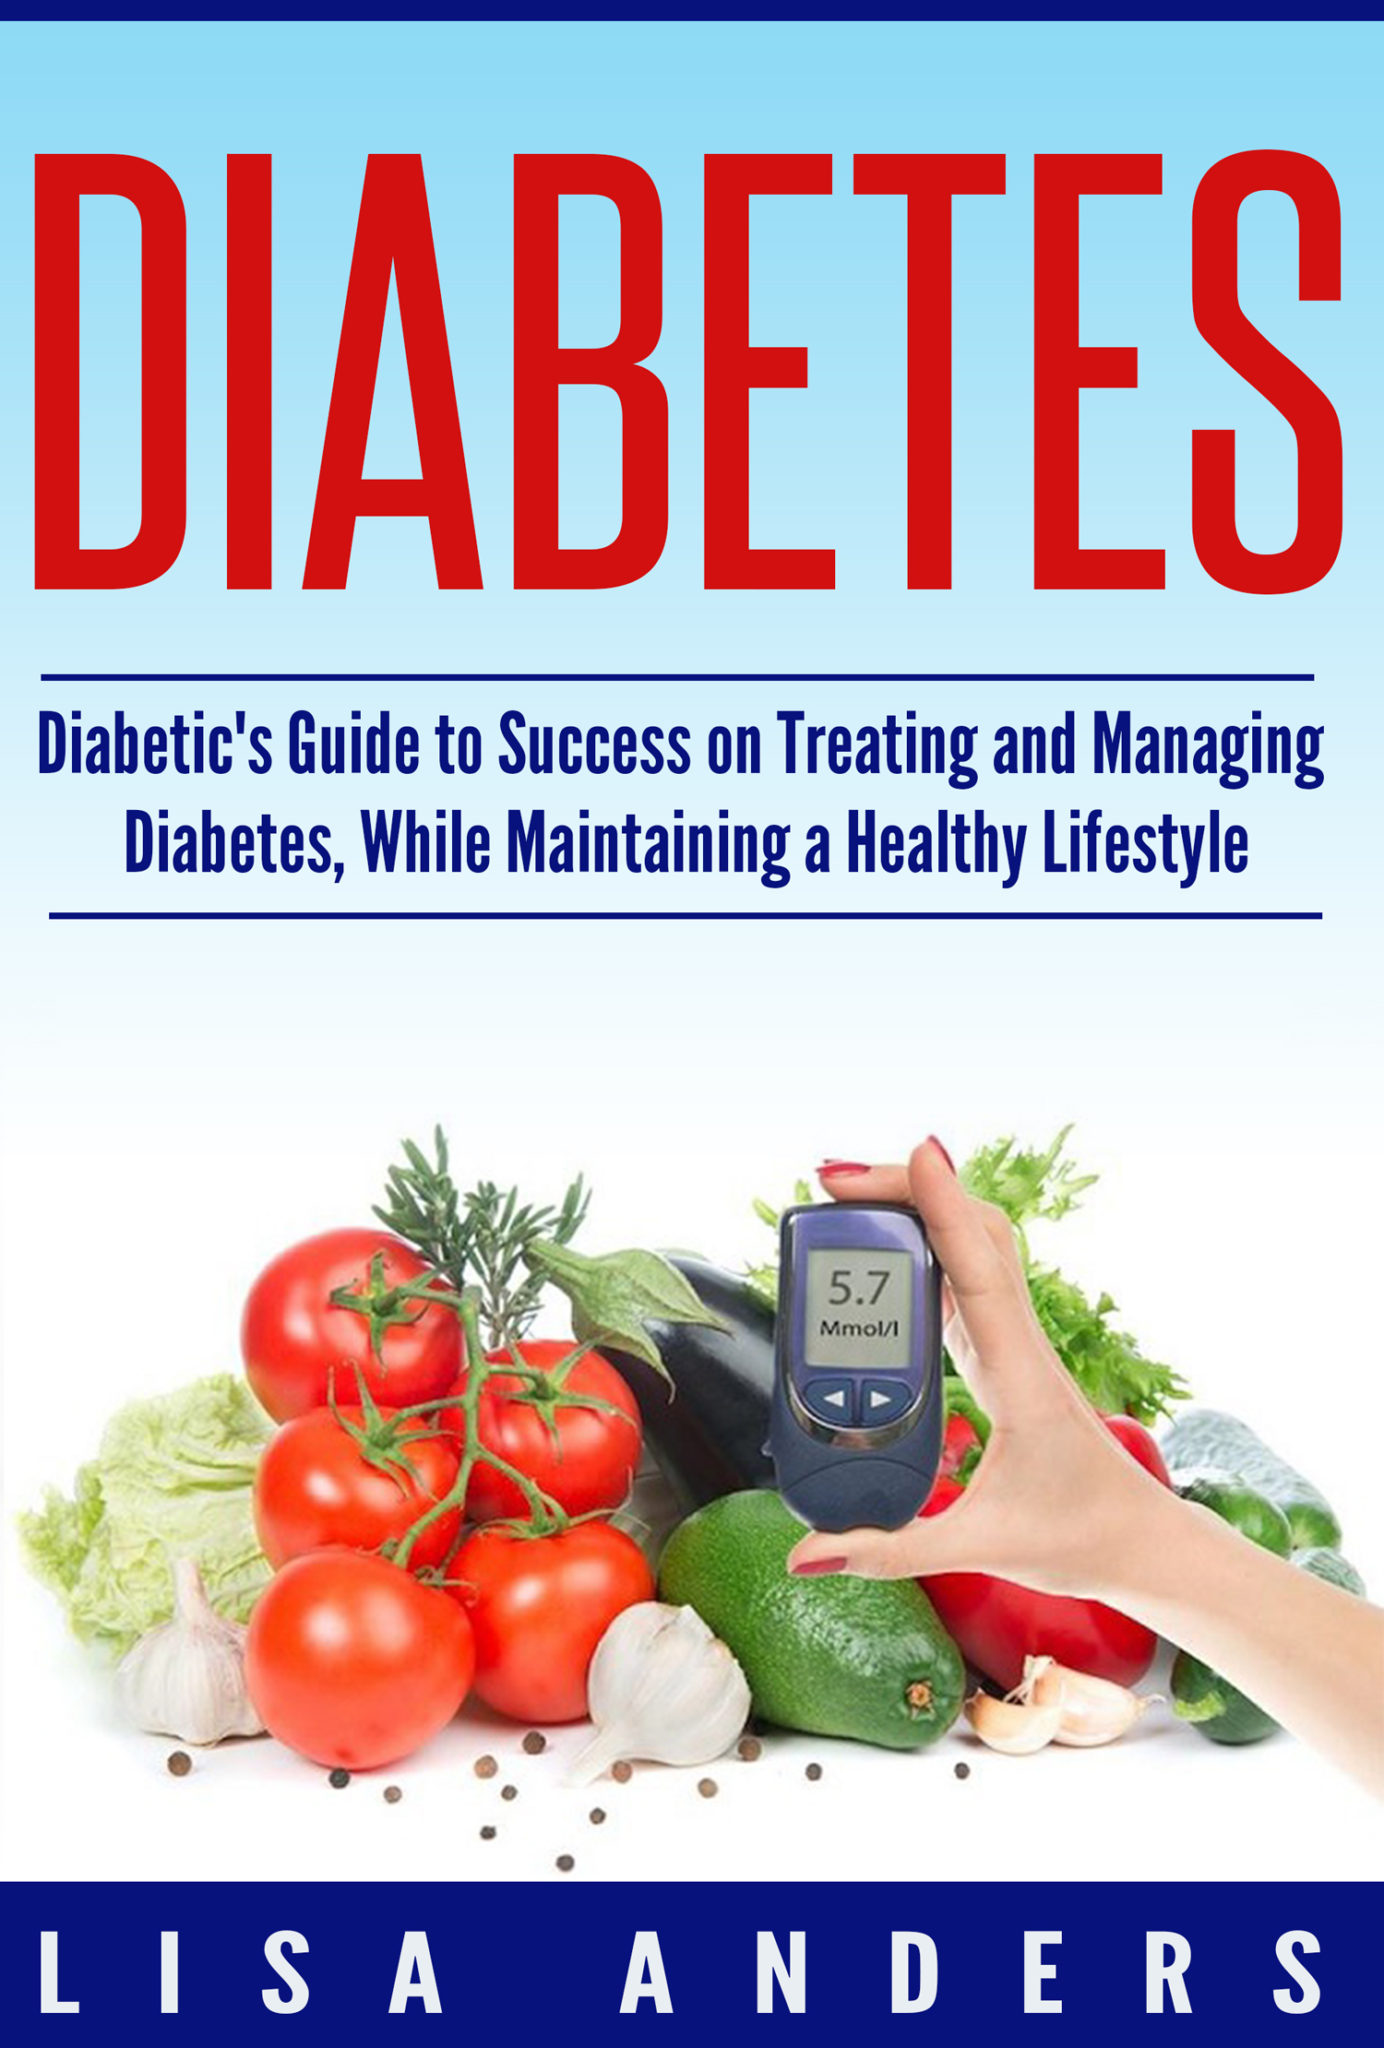 FREE: Diabetes: A Diabetic’s Guide to Success on Treating and Managing Diabetes by Lisa Anders